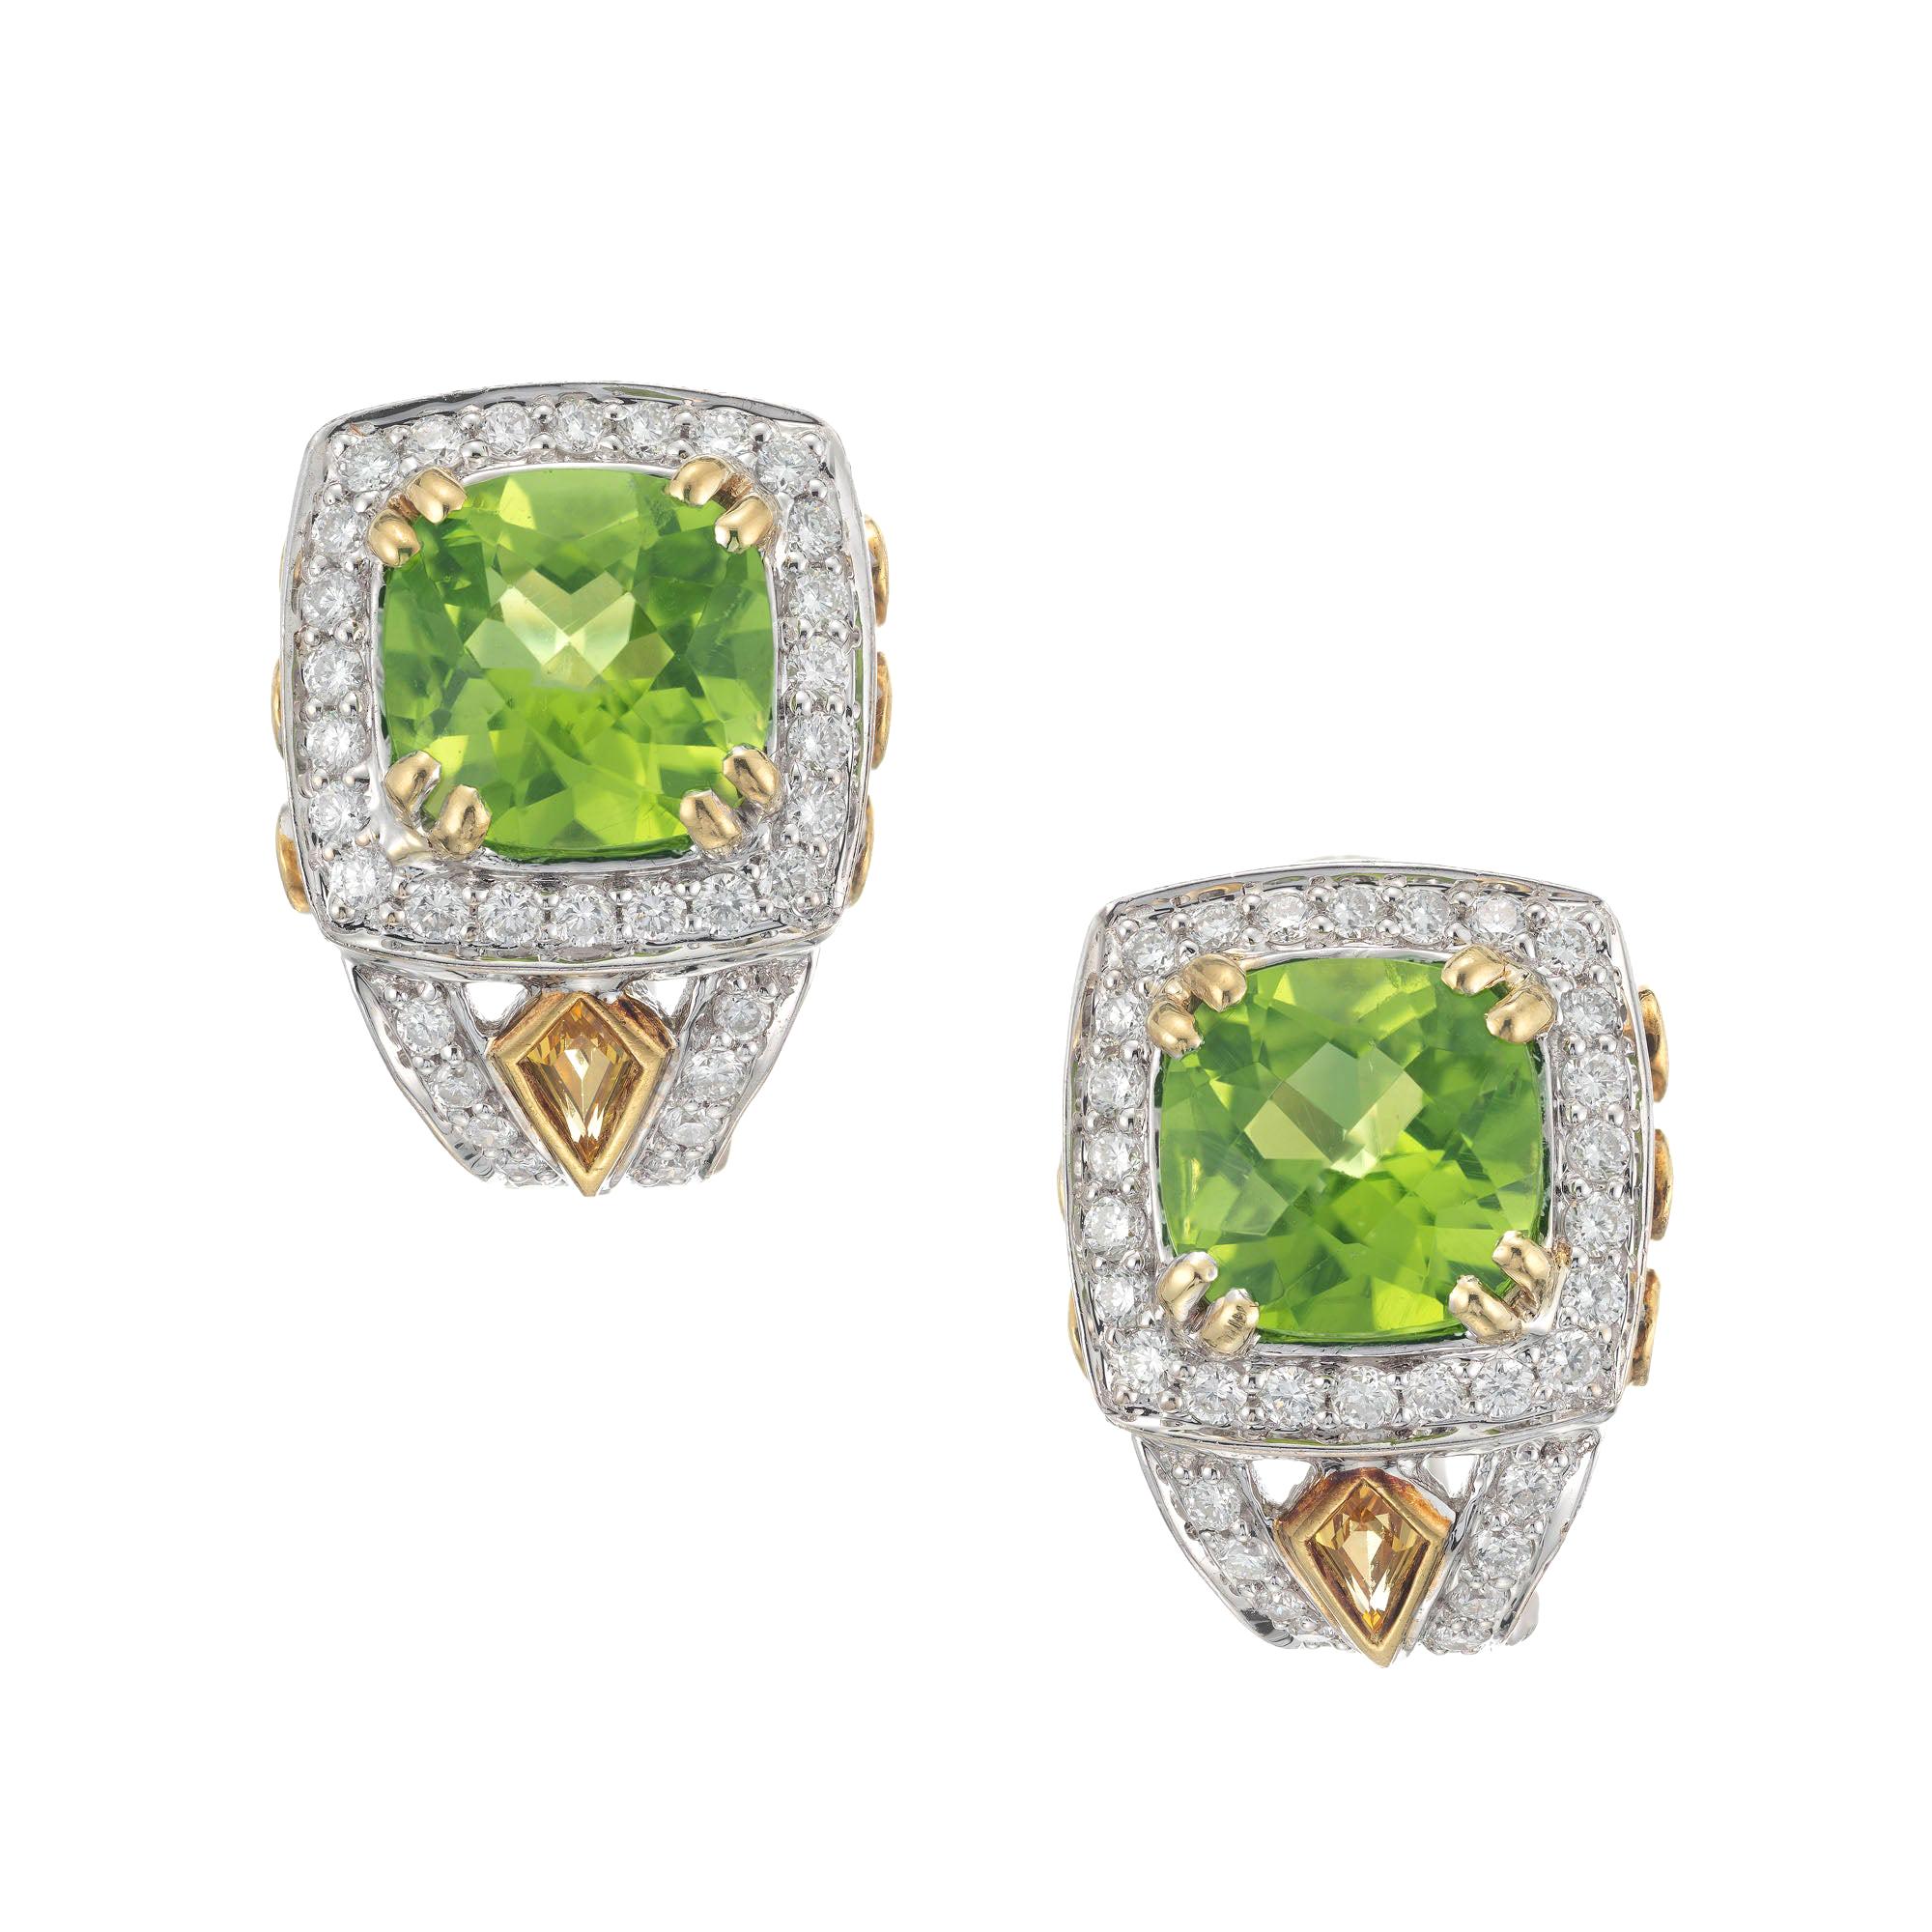 Charles Krypell Peridot Yellow Sapphire Diamond Gold Earrings For Sale